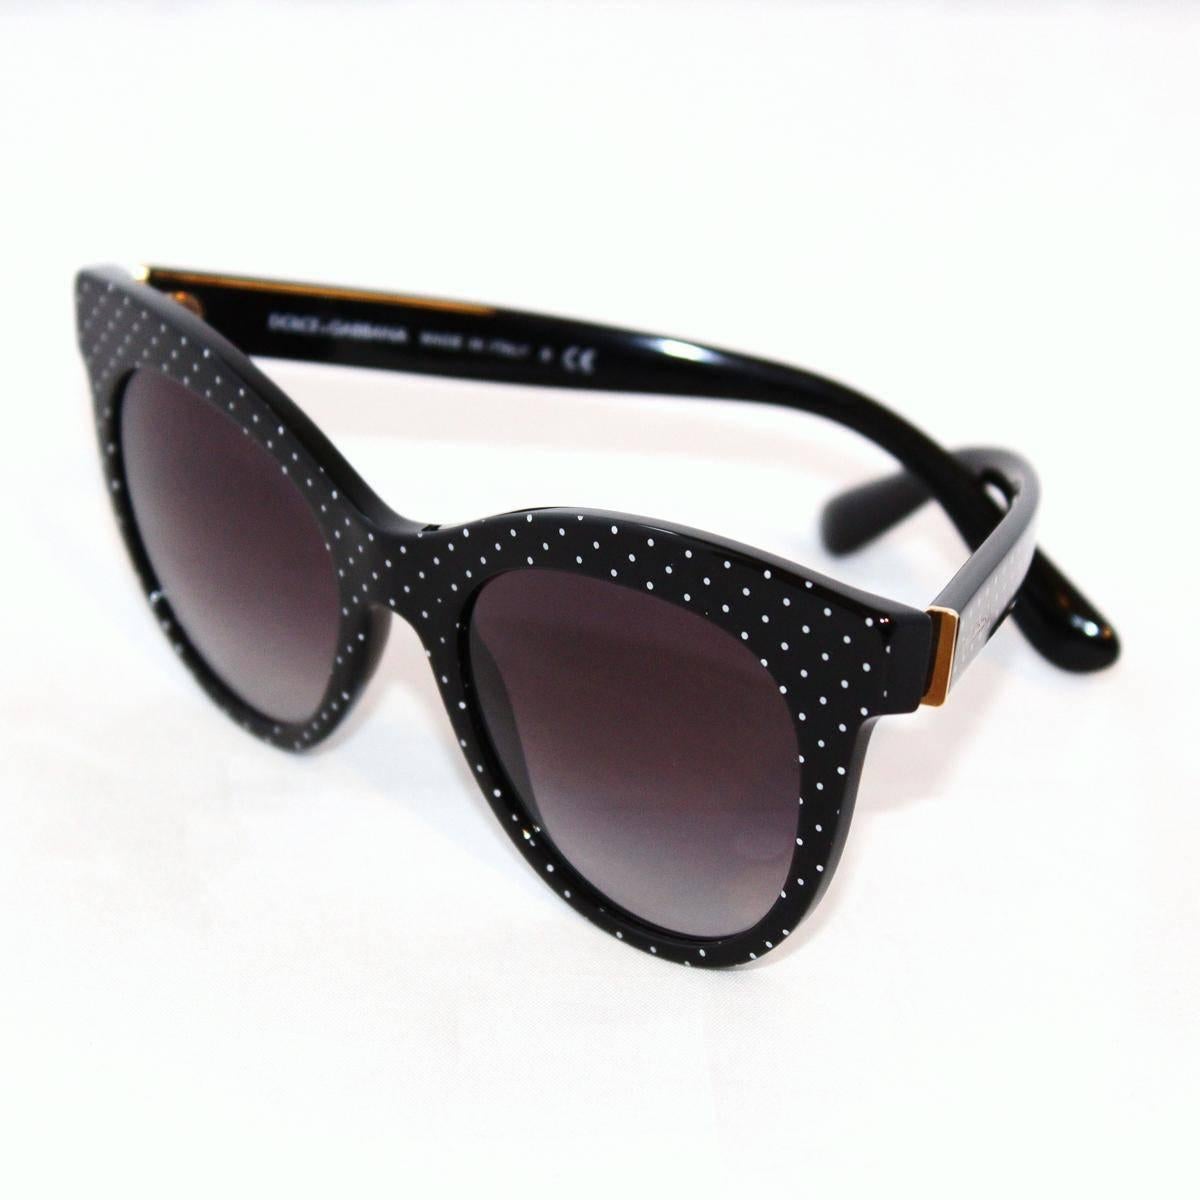 DG 4311
Black frame
Pois texture
Width cm 14 (5.5 inches)
New with case
Condition: New with case
Worldwide express shipping included in the price !